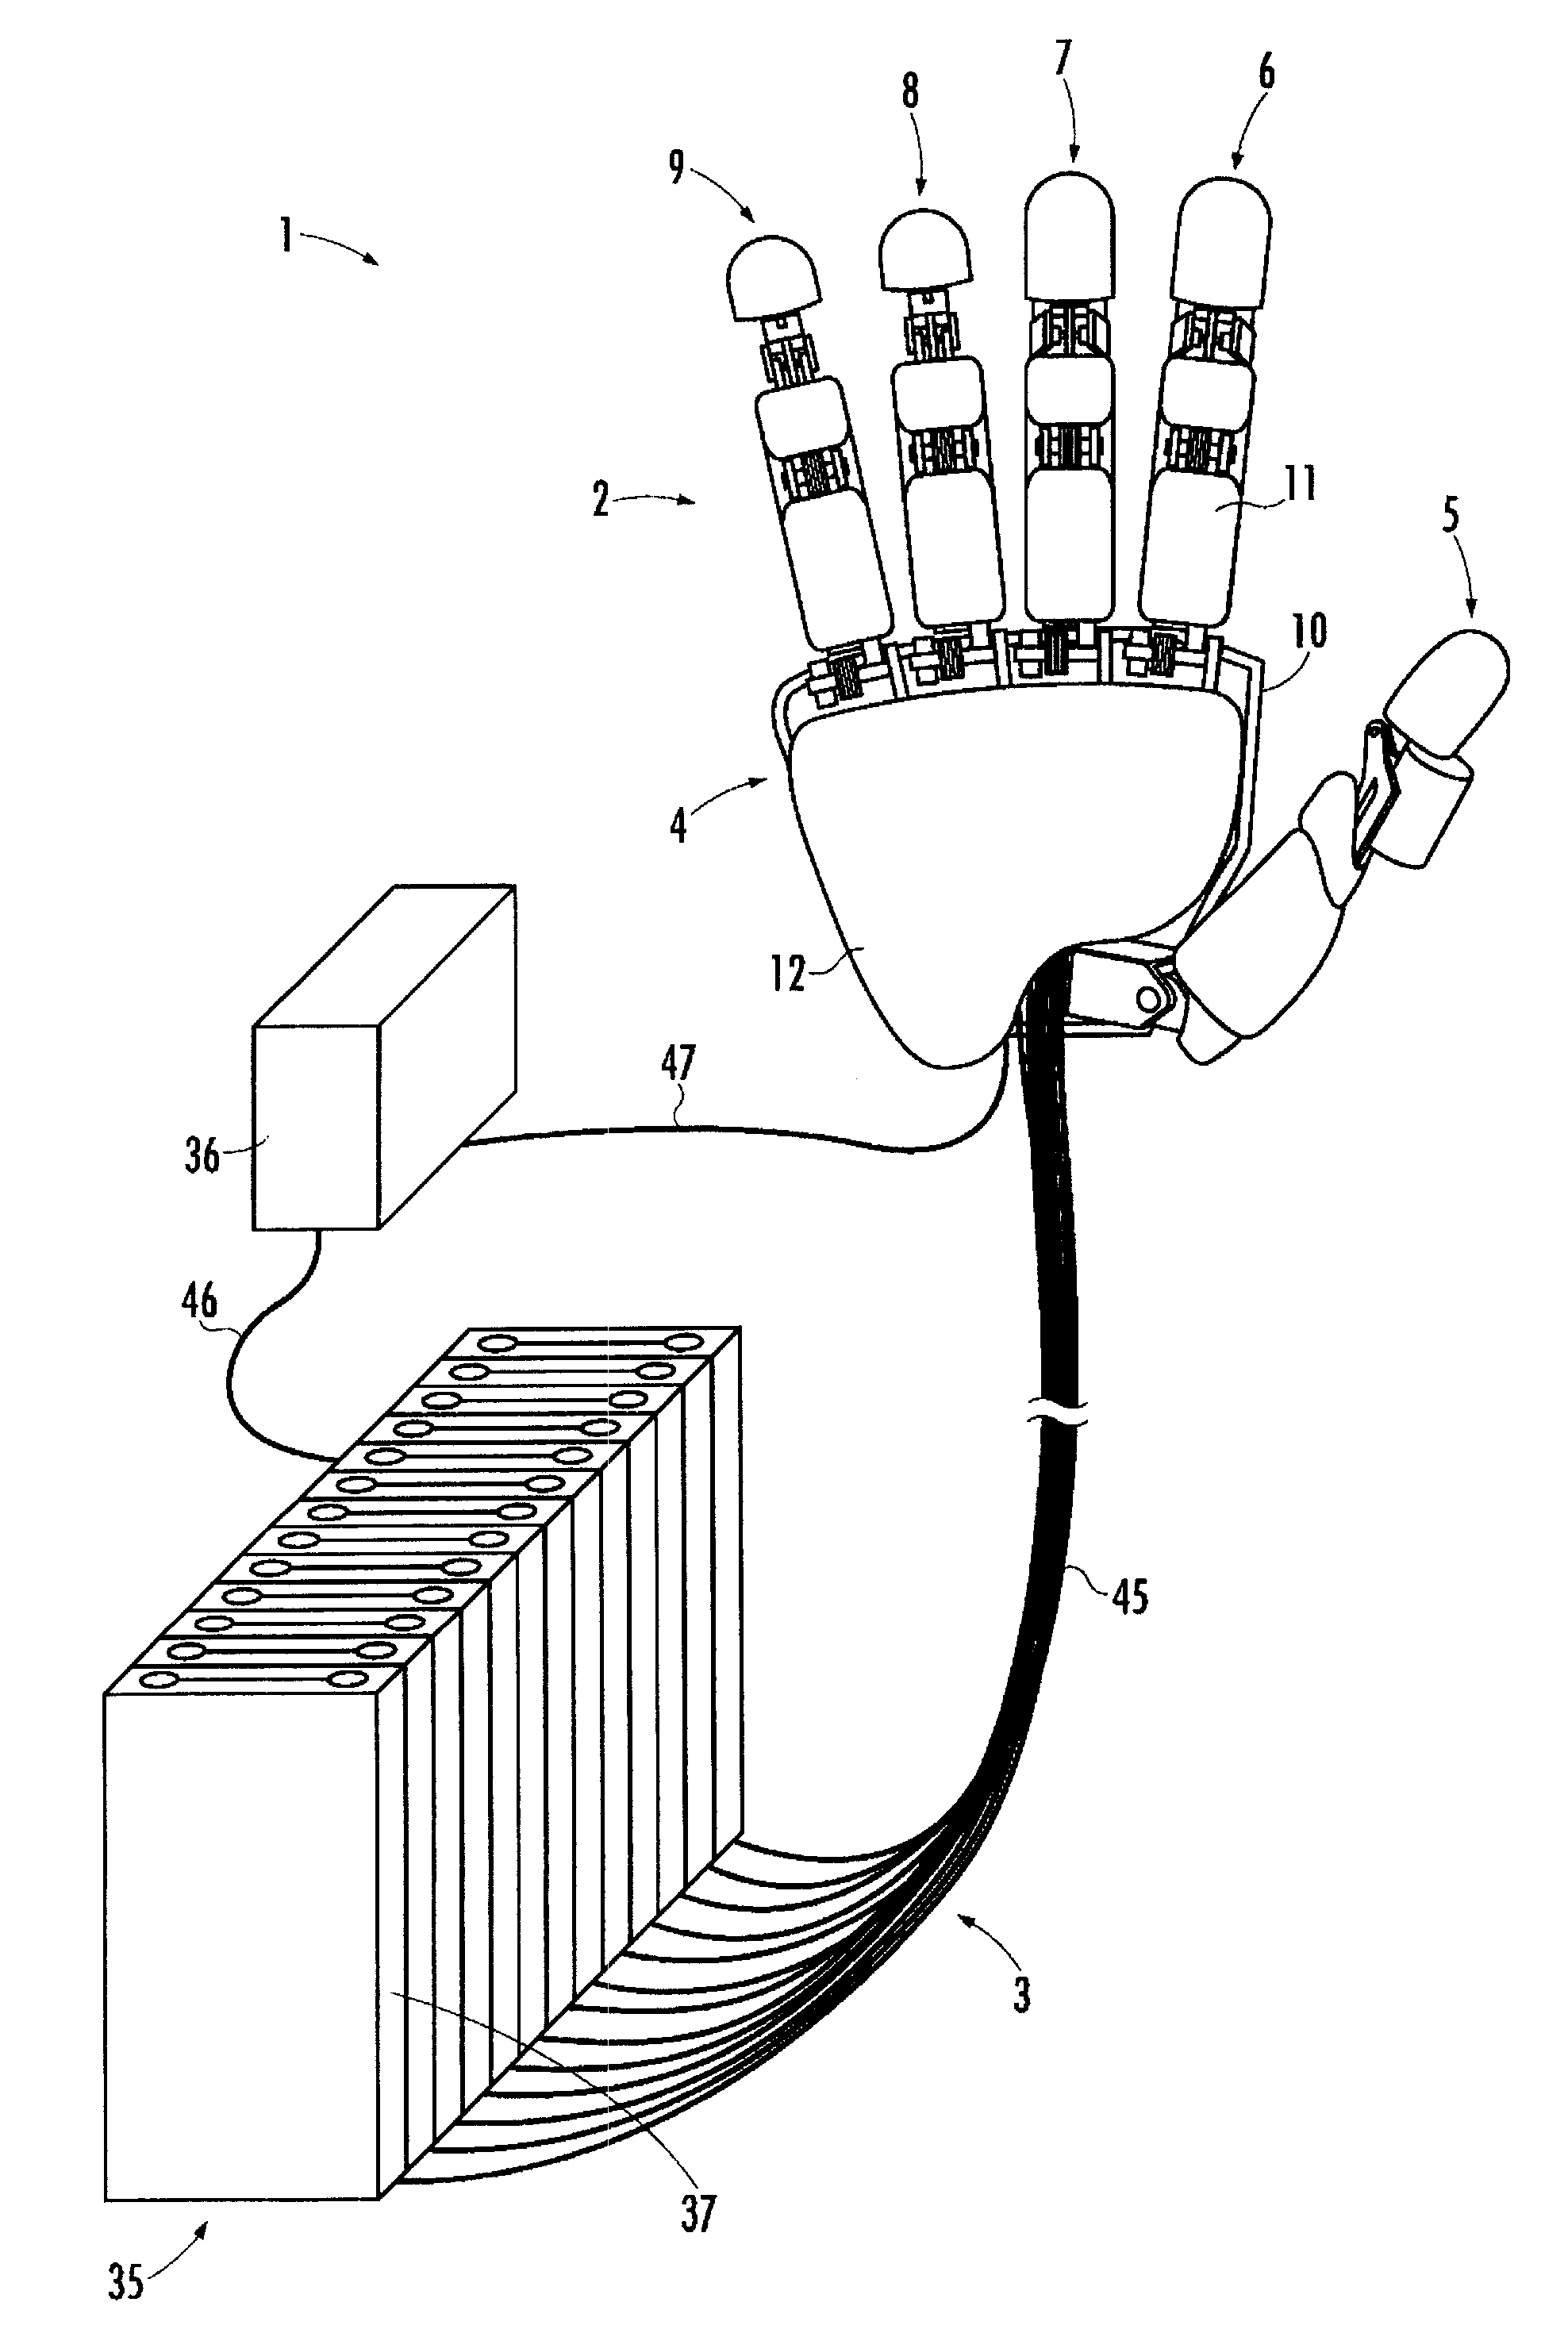 Five-fingered hand device